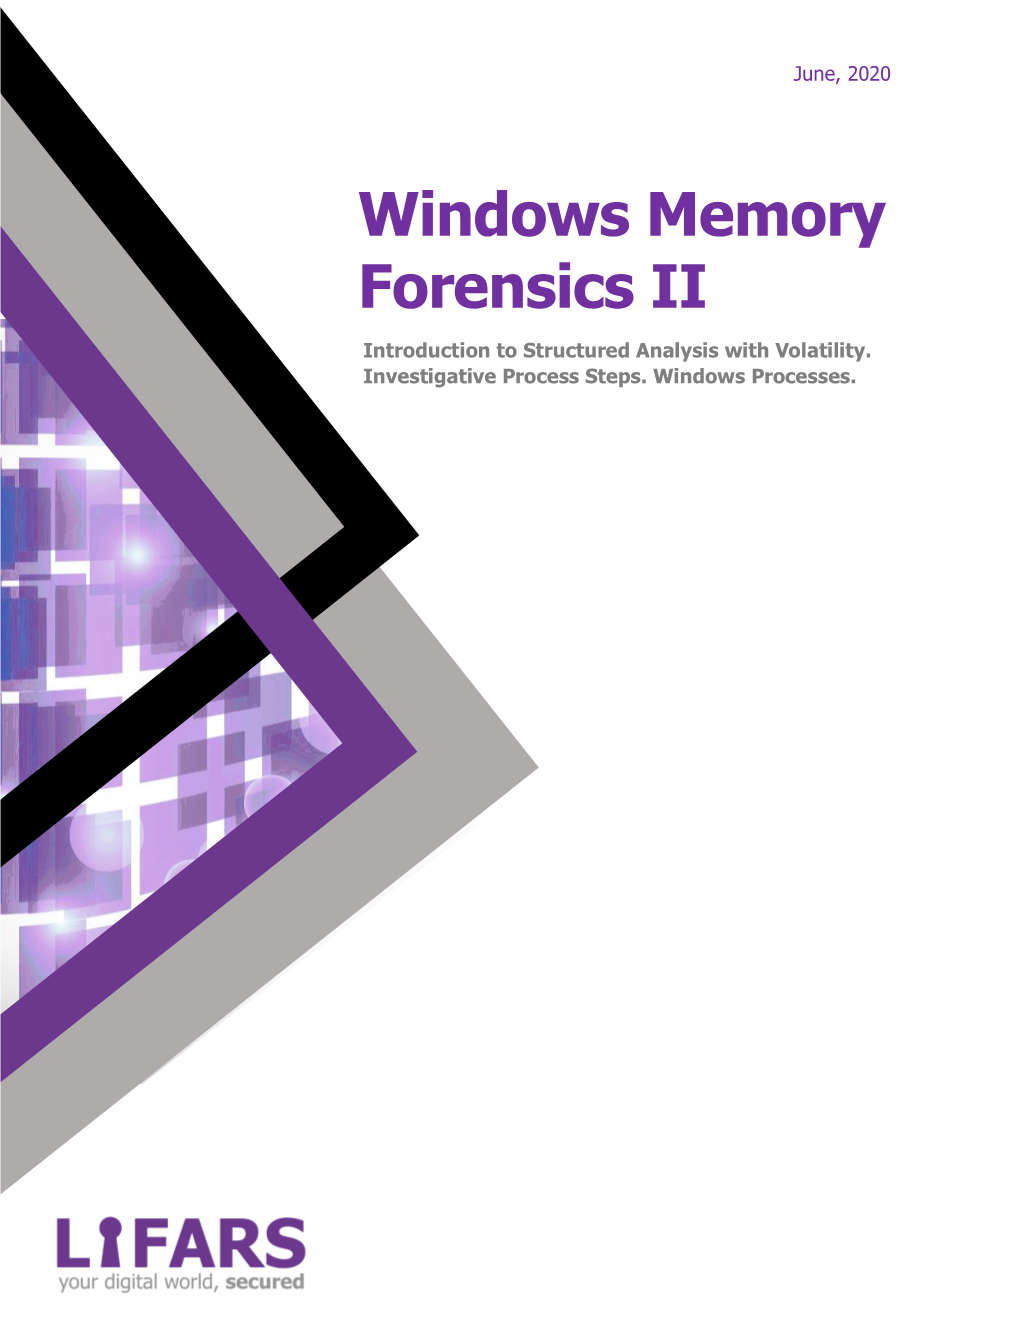 Windows Memory Forensics Technical Guide Part 2